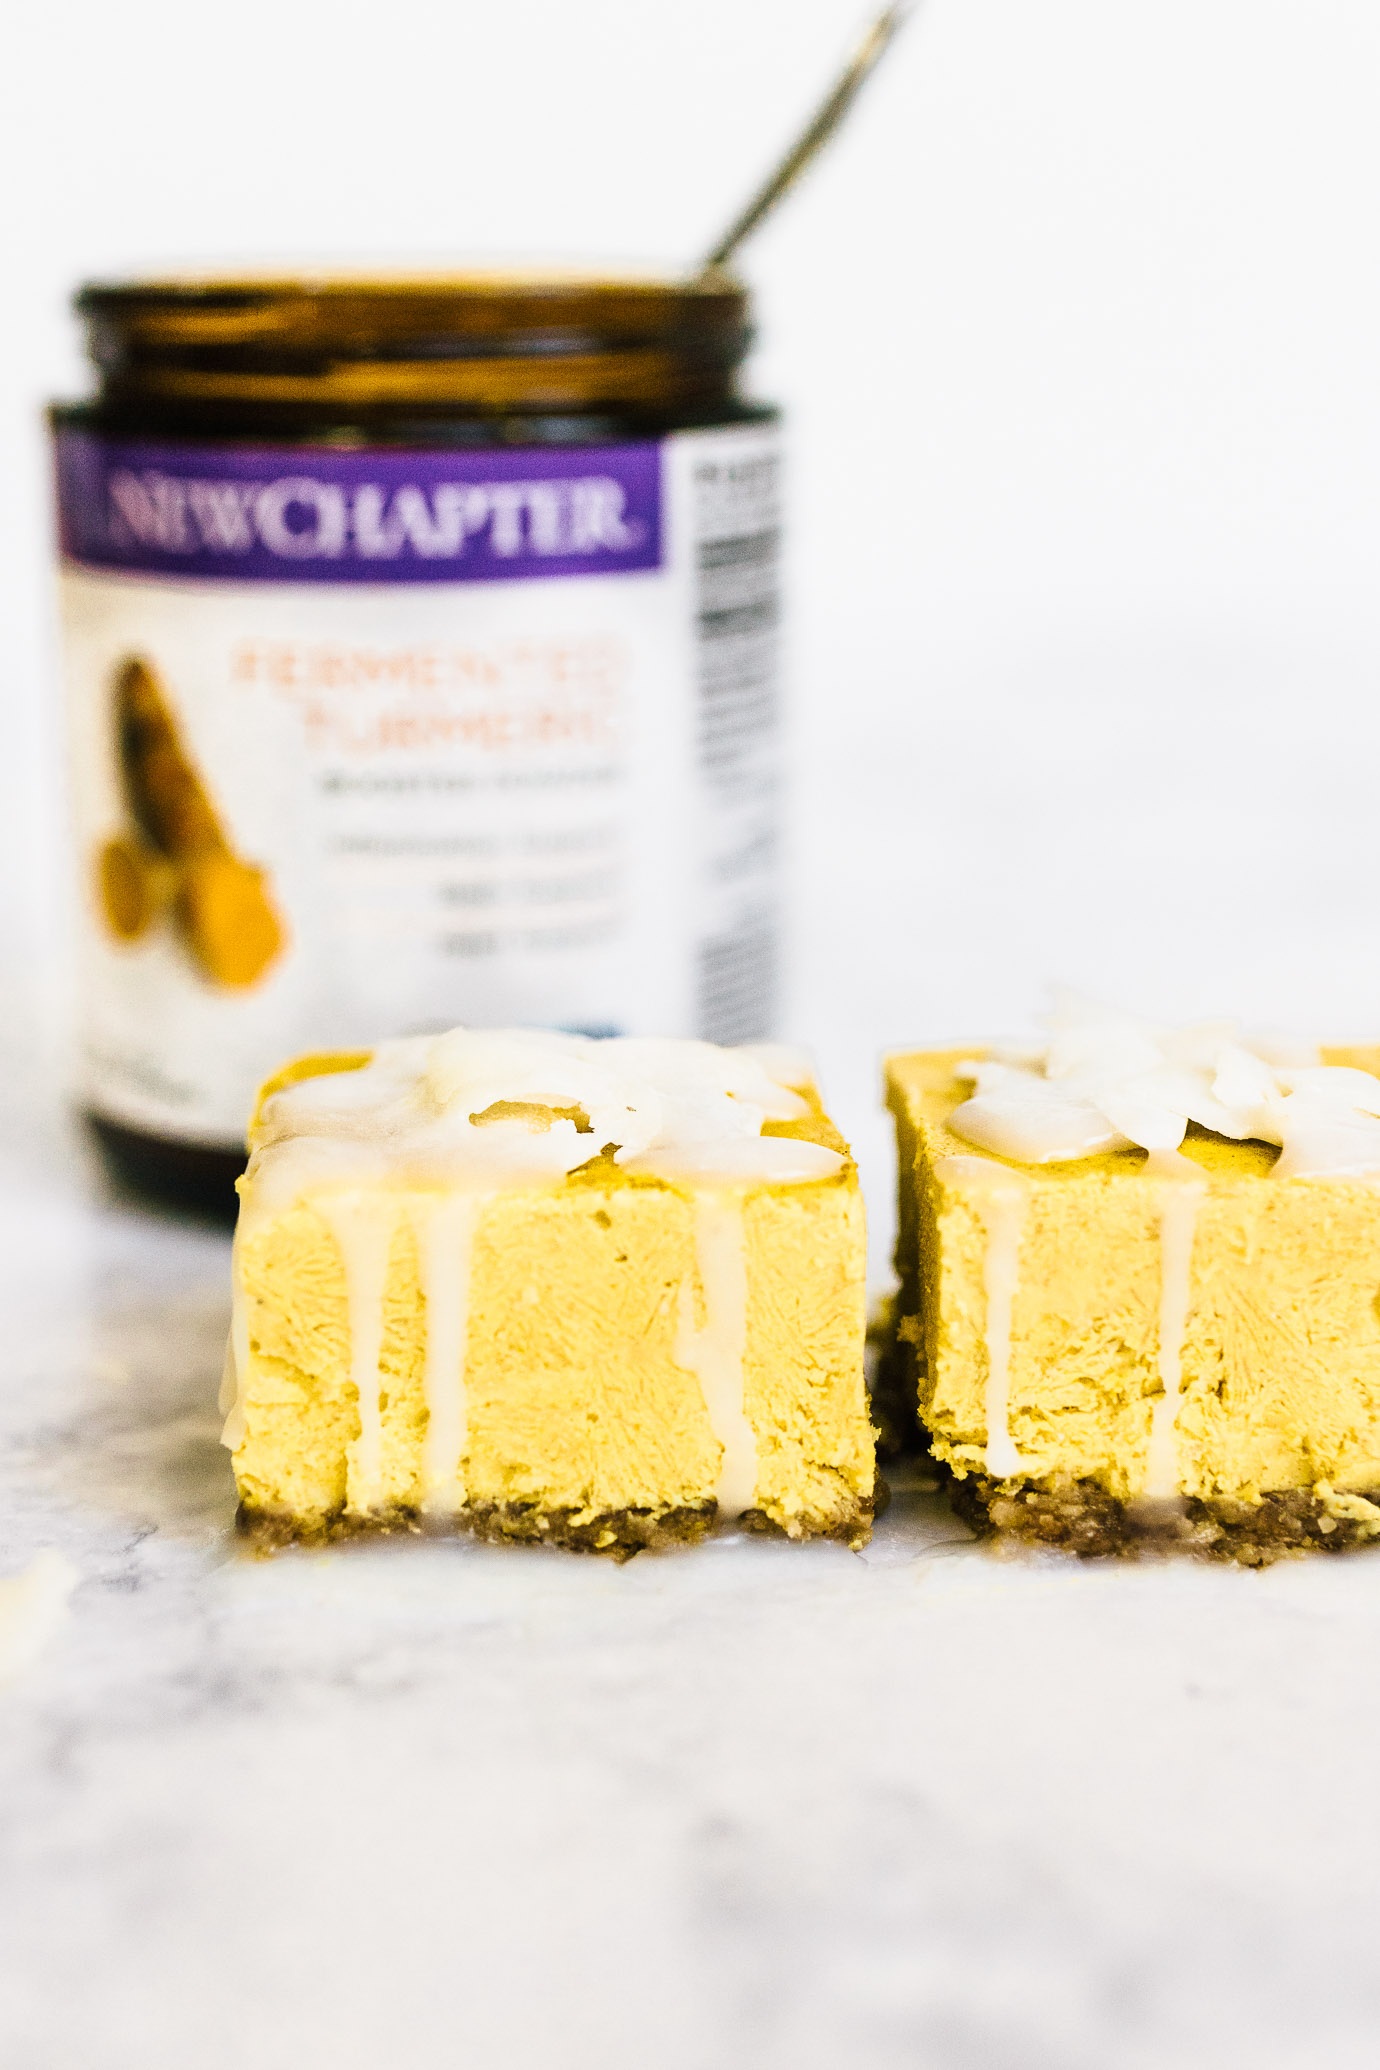 Golden Milk Cheesecake Bars with New Chapter Turmeric Booster